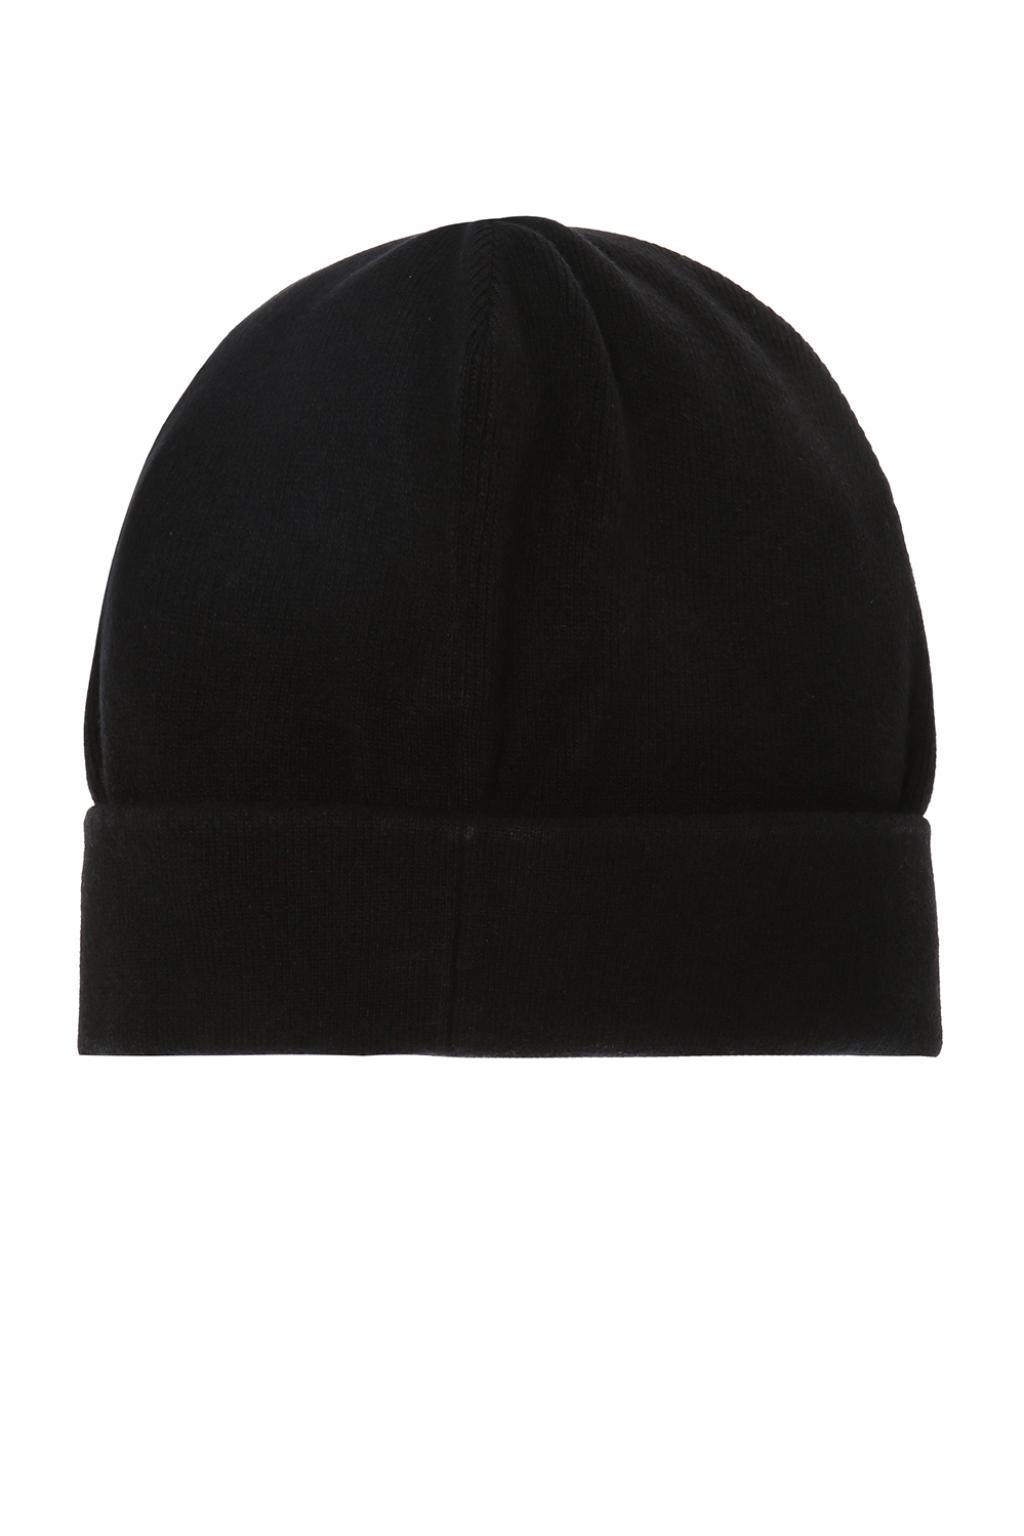 Balmain Hat With An Embroidered Logo in Black for Men - Lyst